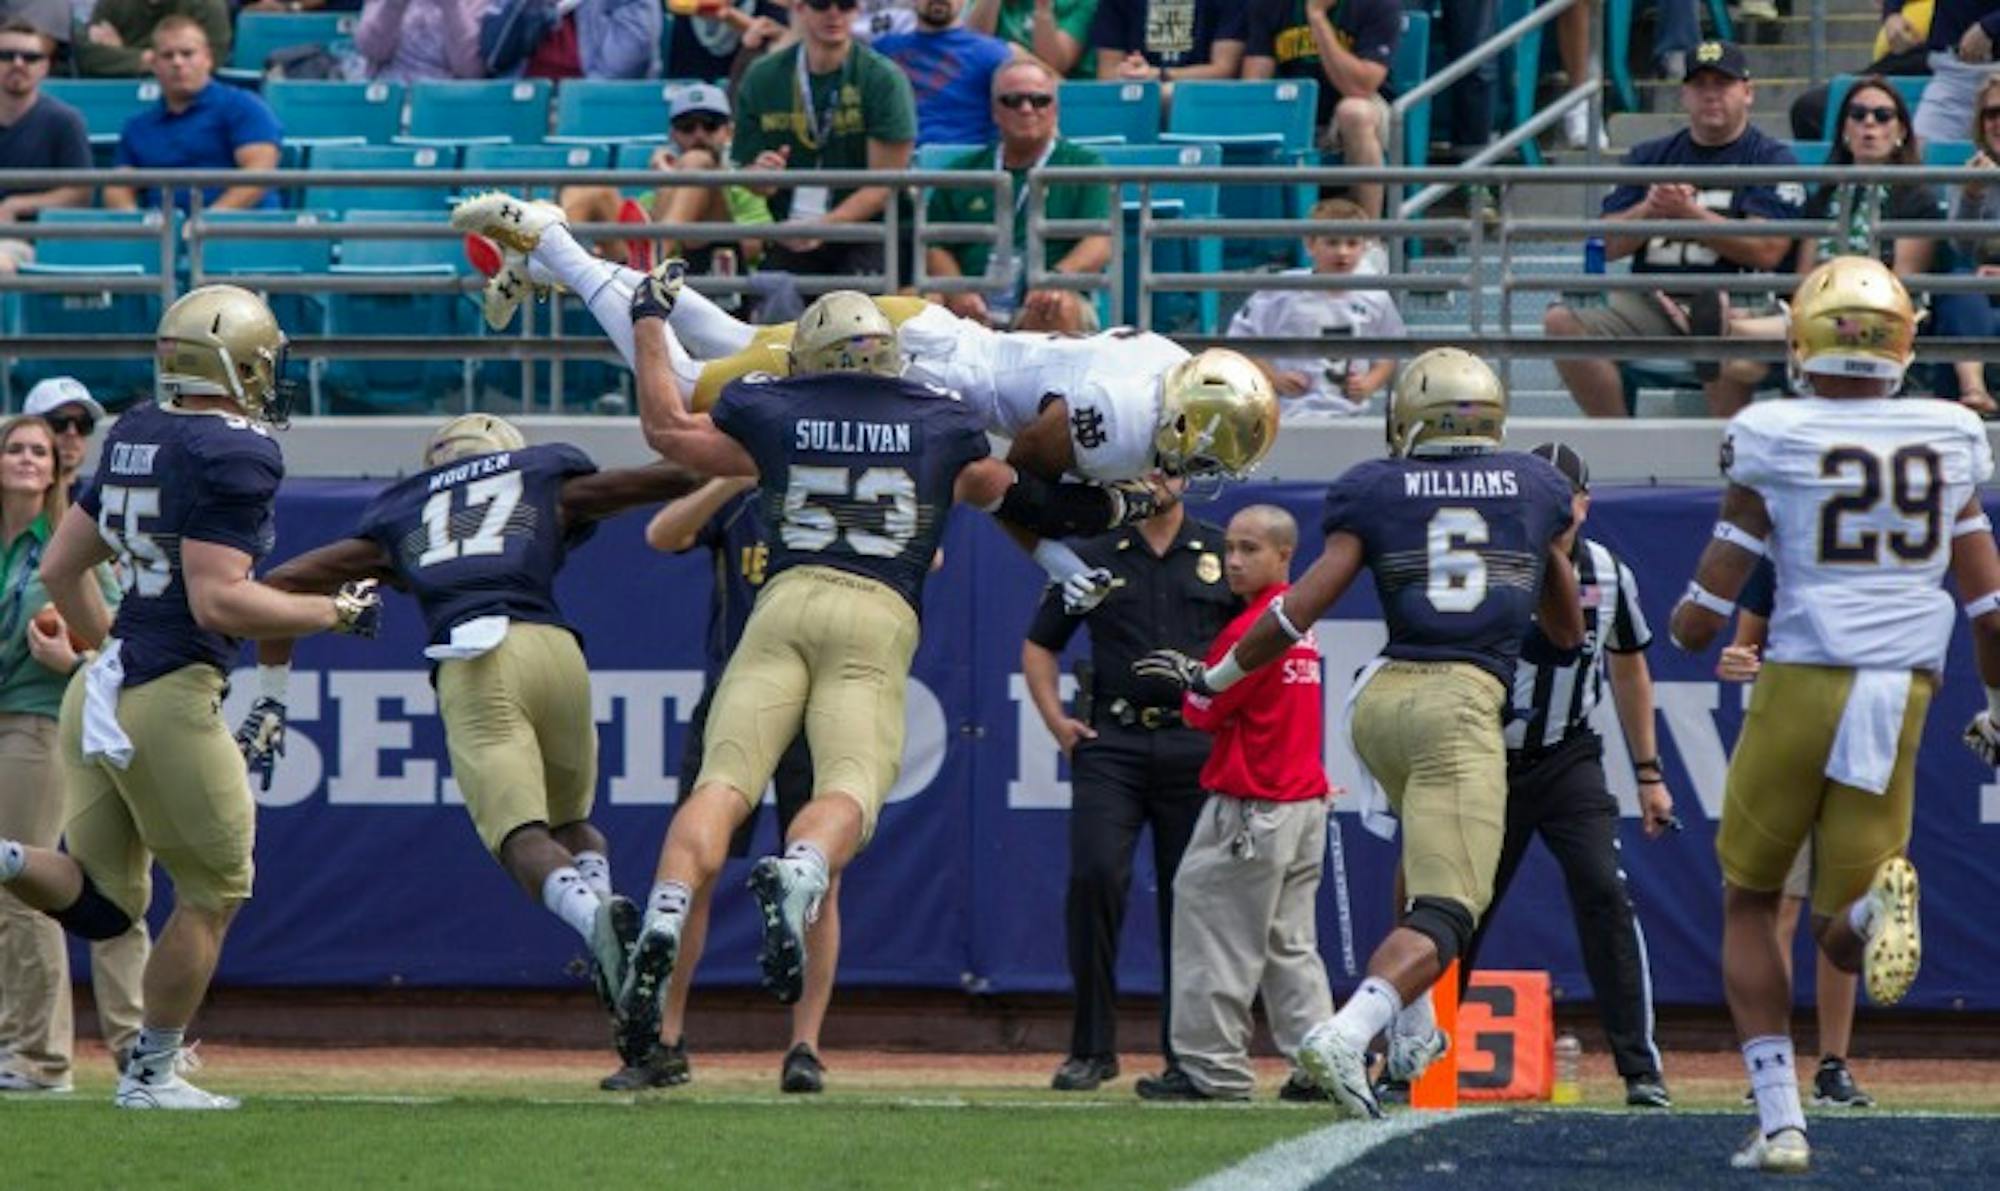 Irish sophomore receiver Eqaunimeous St. Brown flips into the end zone during Notre Dame's 28-27 loss to Navy on Saturday in Jacksonville. St. Brown had 62 receiving and one touchdown on the day.